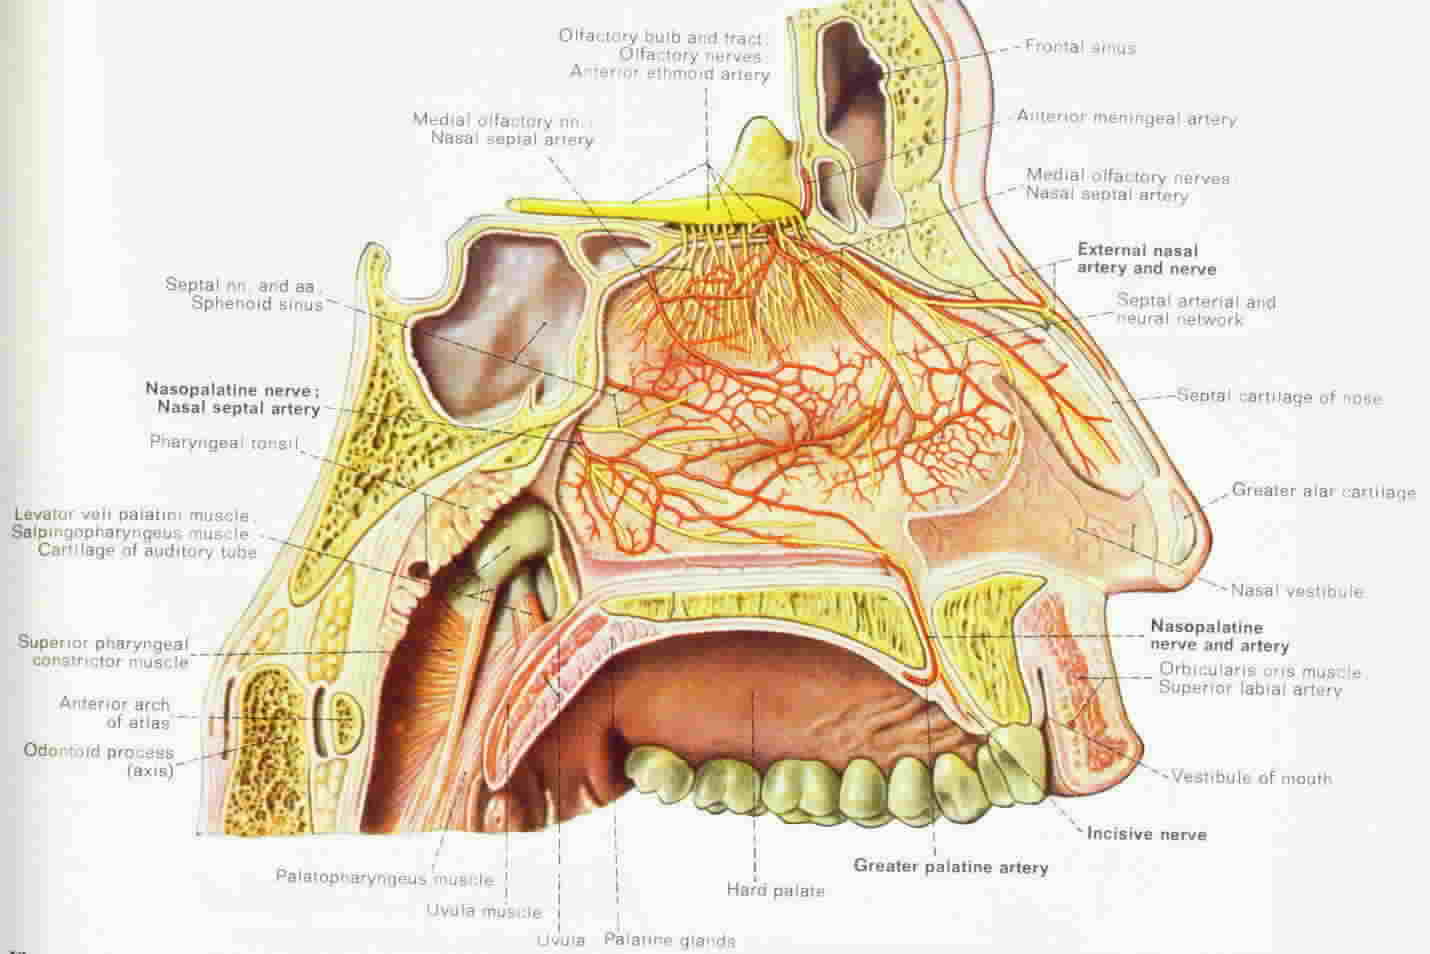 Diagram of the highly vascularized nasal mucosa